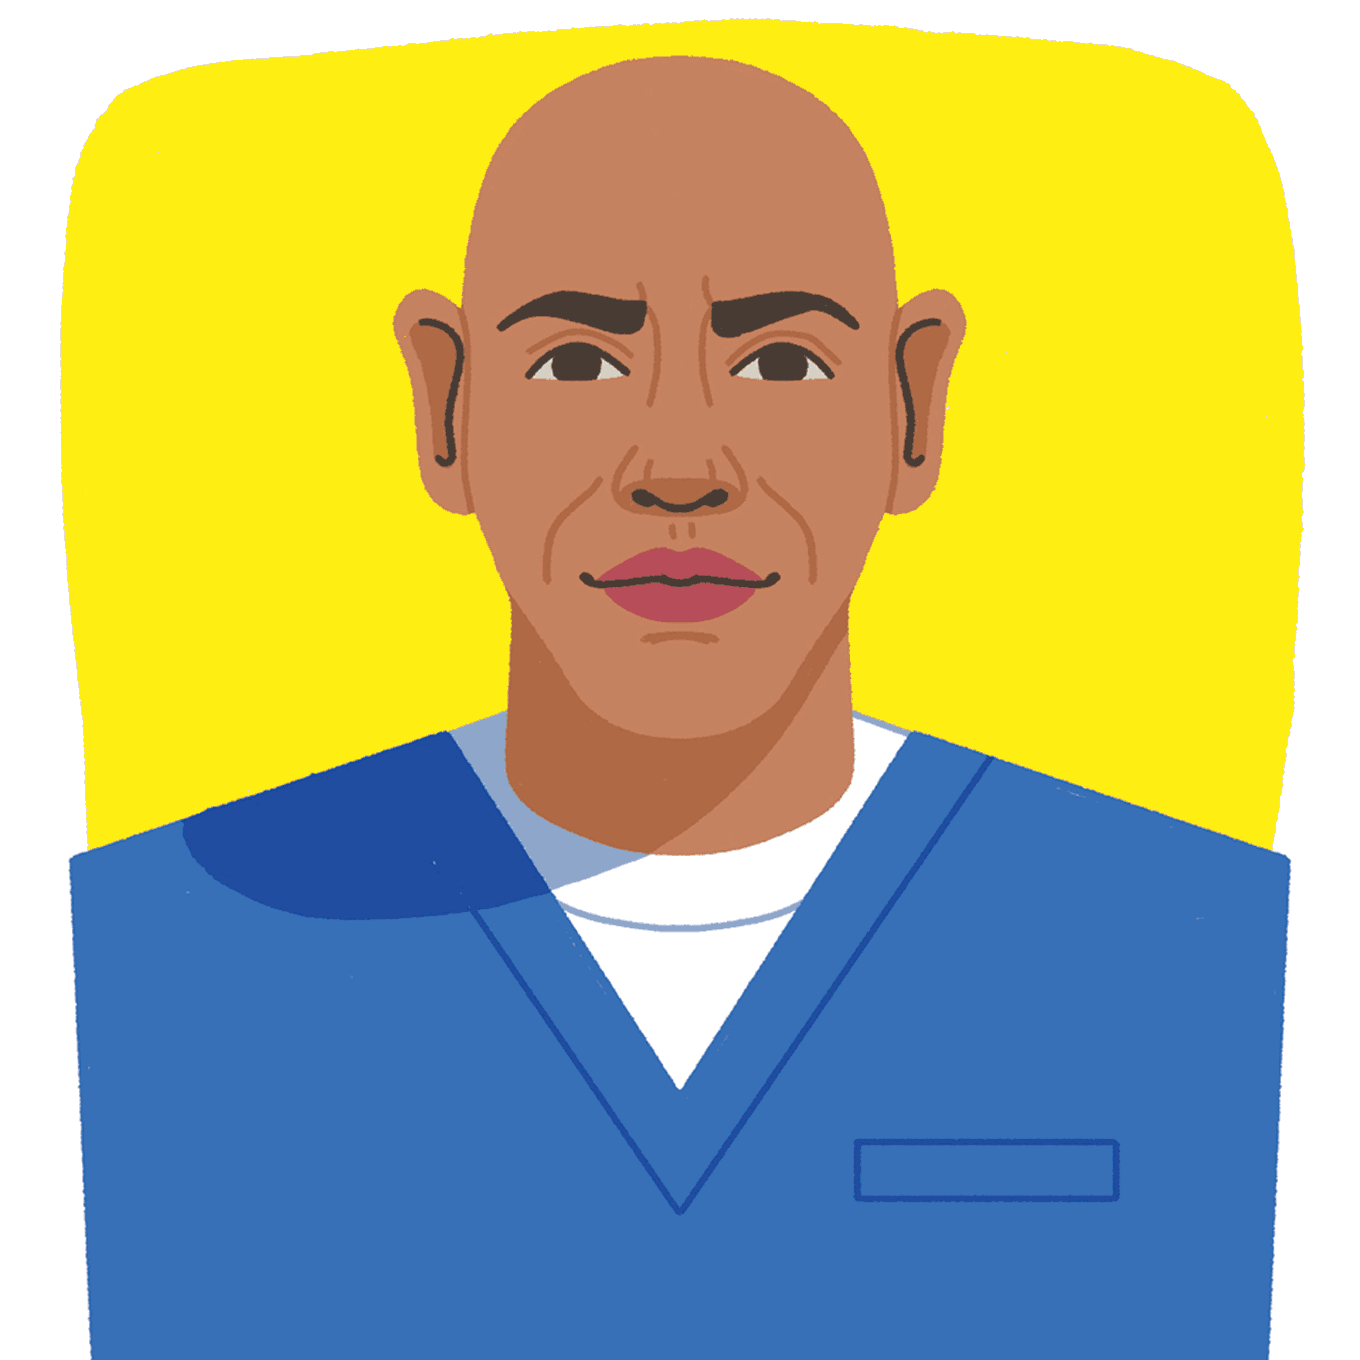 Kwane Stewart, illustrated in bold colors